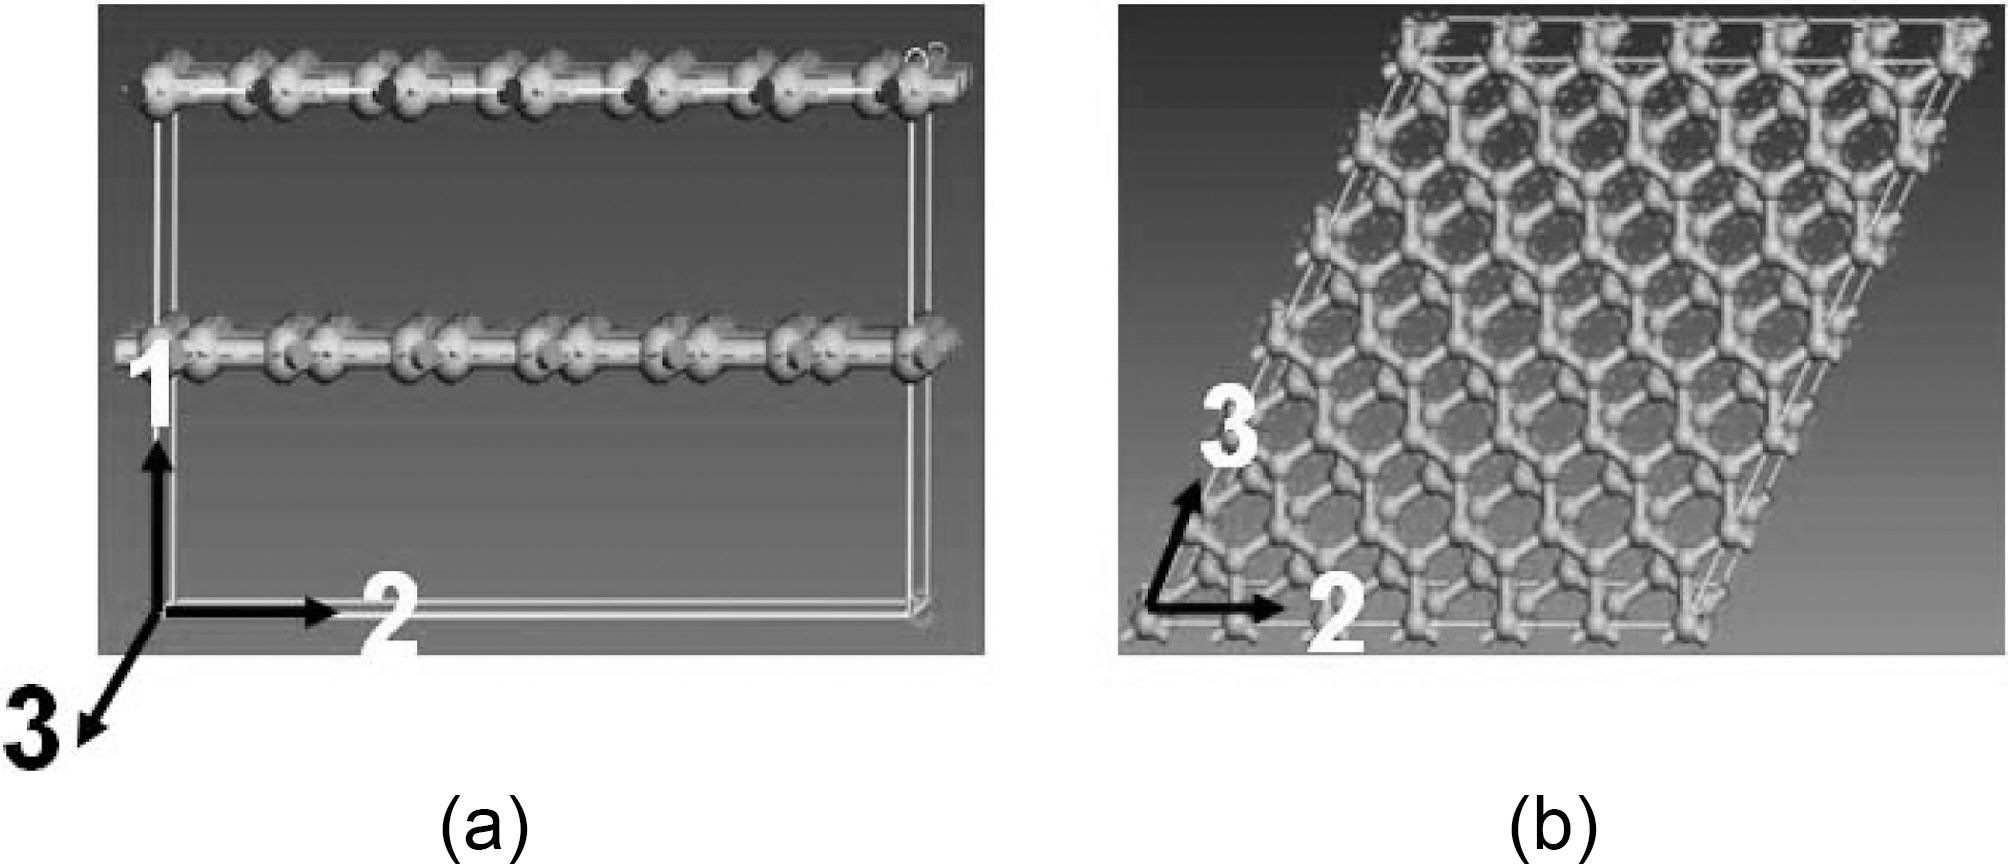 Double layered graphite super cell (a) side view and (b) top view.